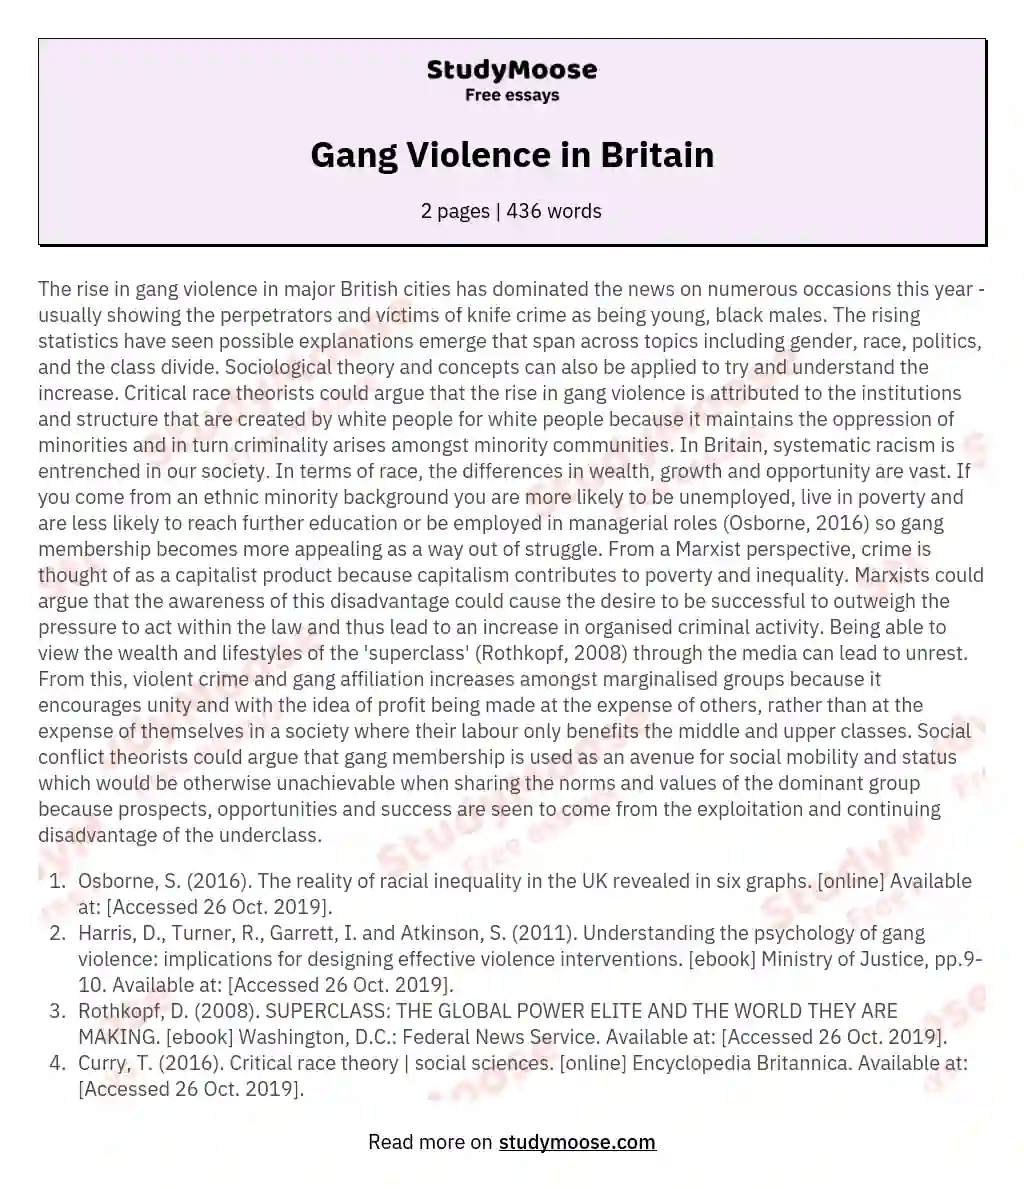 Gang Violence in Britain